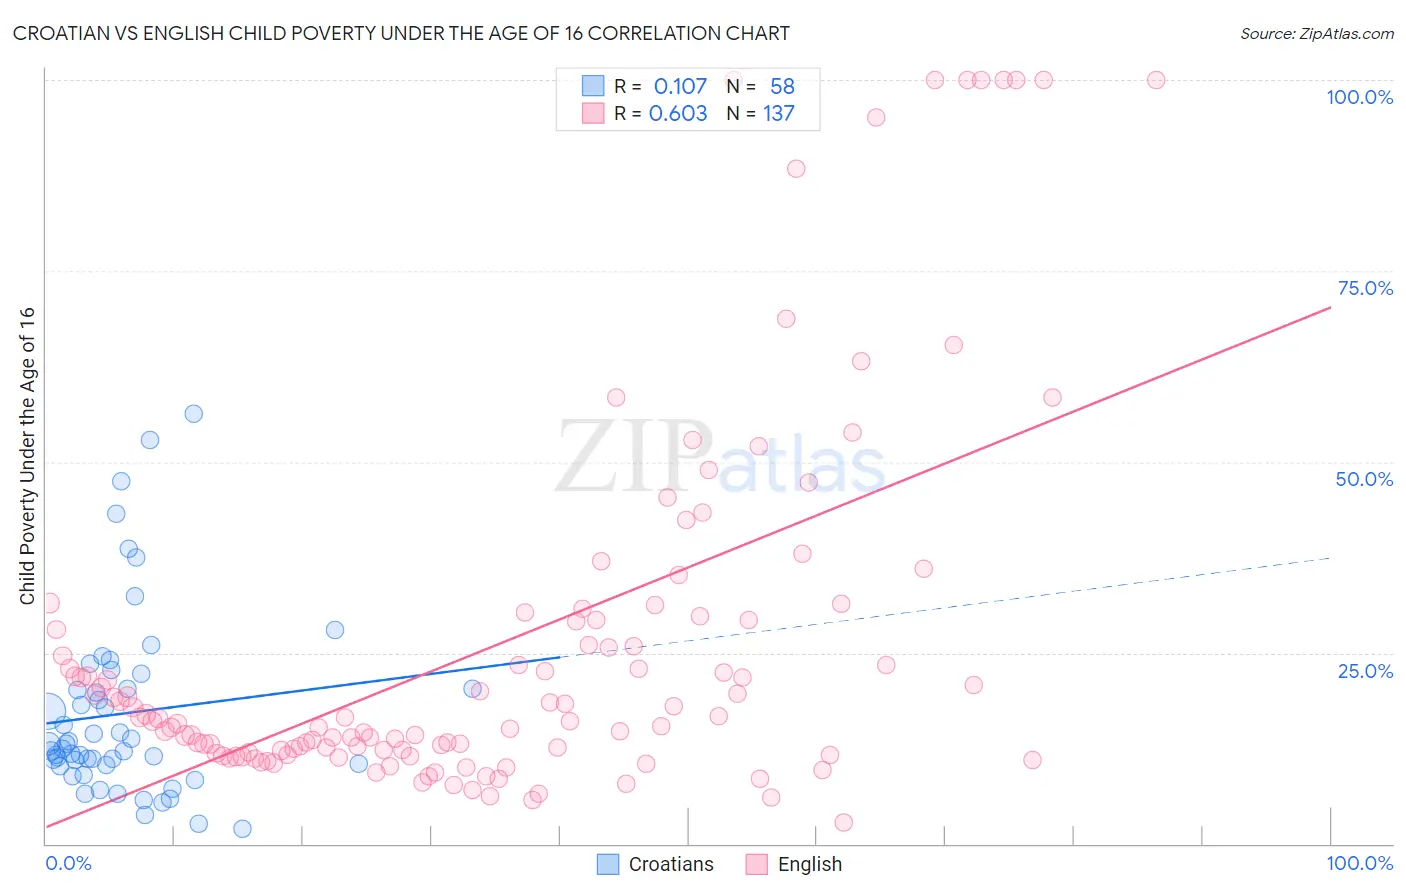 Croatian vs English Child Poverty Under the Age of 16